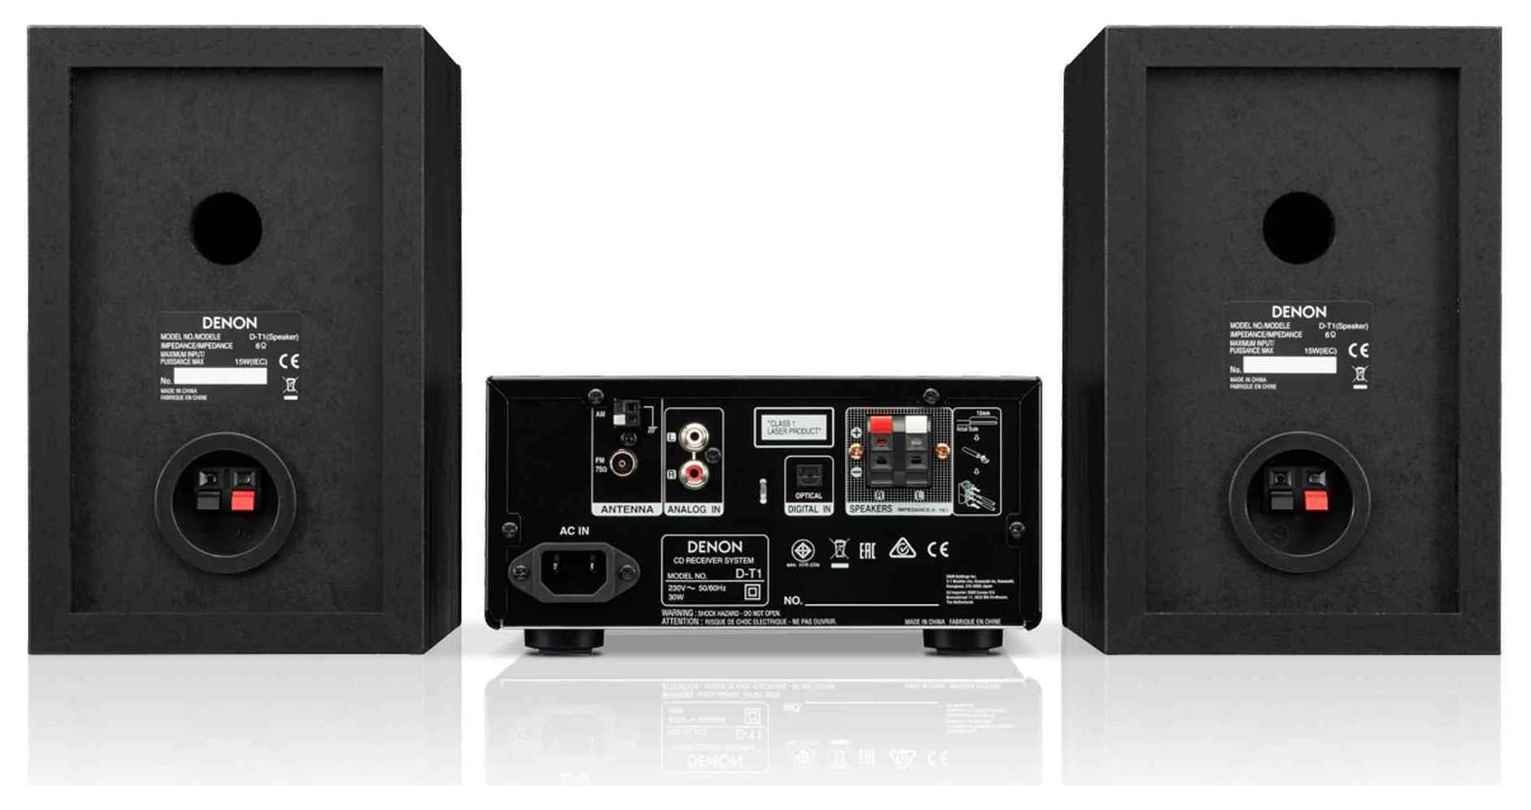 Denon D-T1 Hi-Fi Mini System with CD and Bluetooth- Black Review